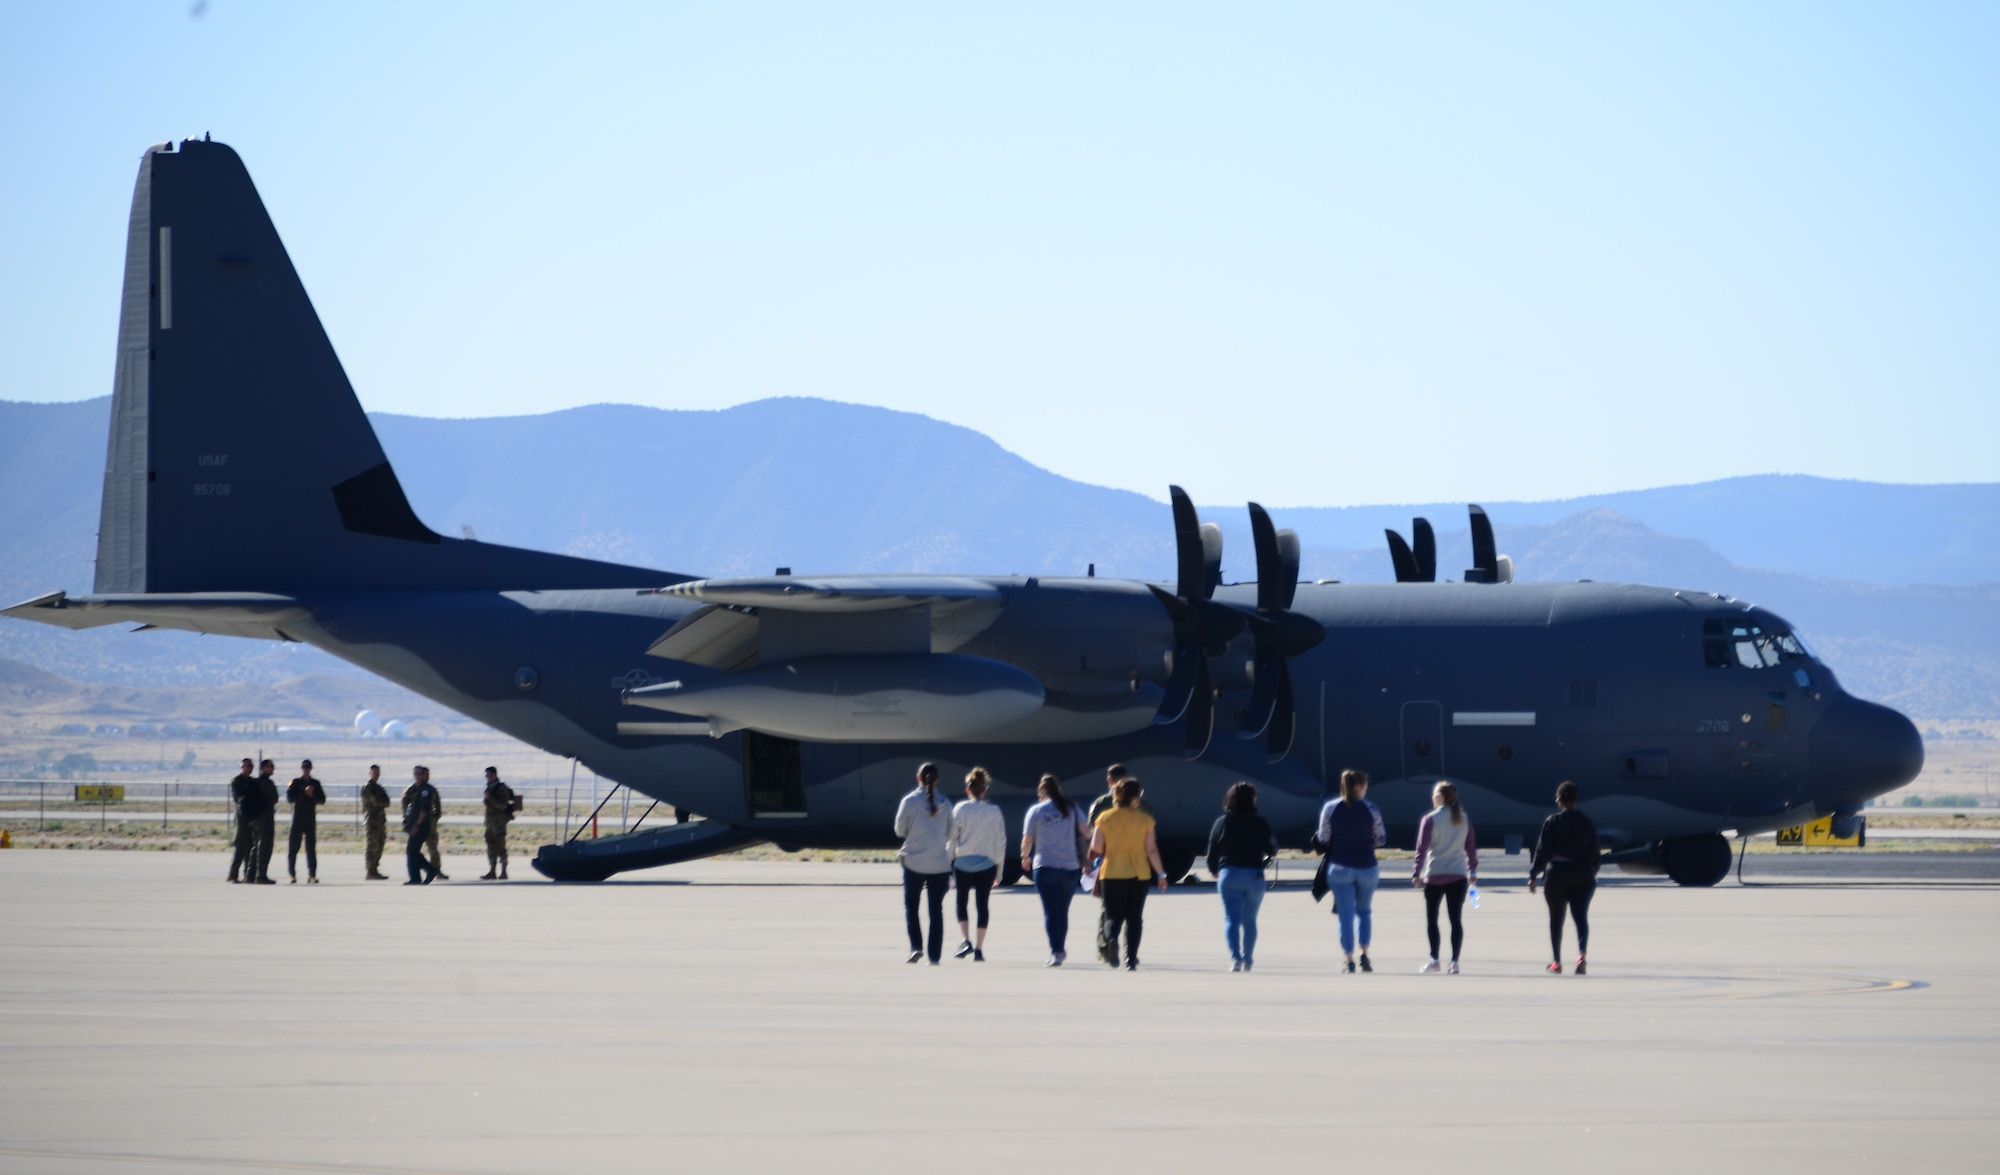 Family members of the 150th and 58th Special Operations Wings boarding the C-130J for an orientation flight as part of the  annual Spouses Day event at Kirtland Air Force Base, New Mexico. May 14, 2022. (U.S. Air Force photo by Jeremy T. Dyer.)